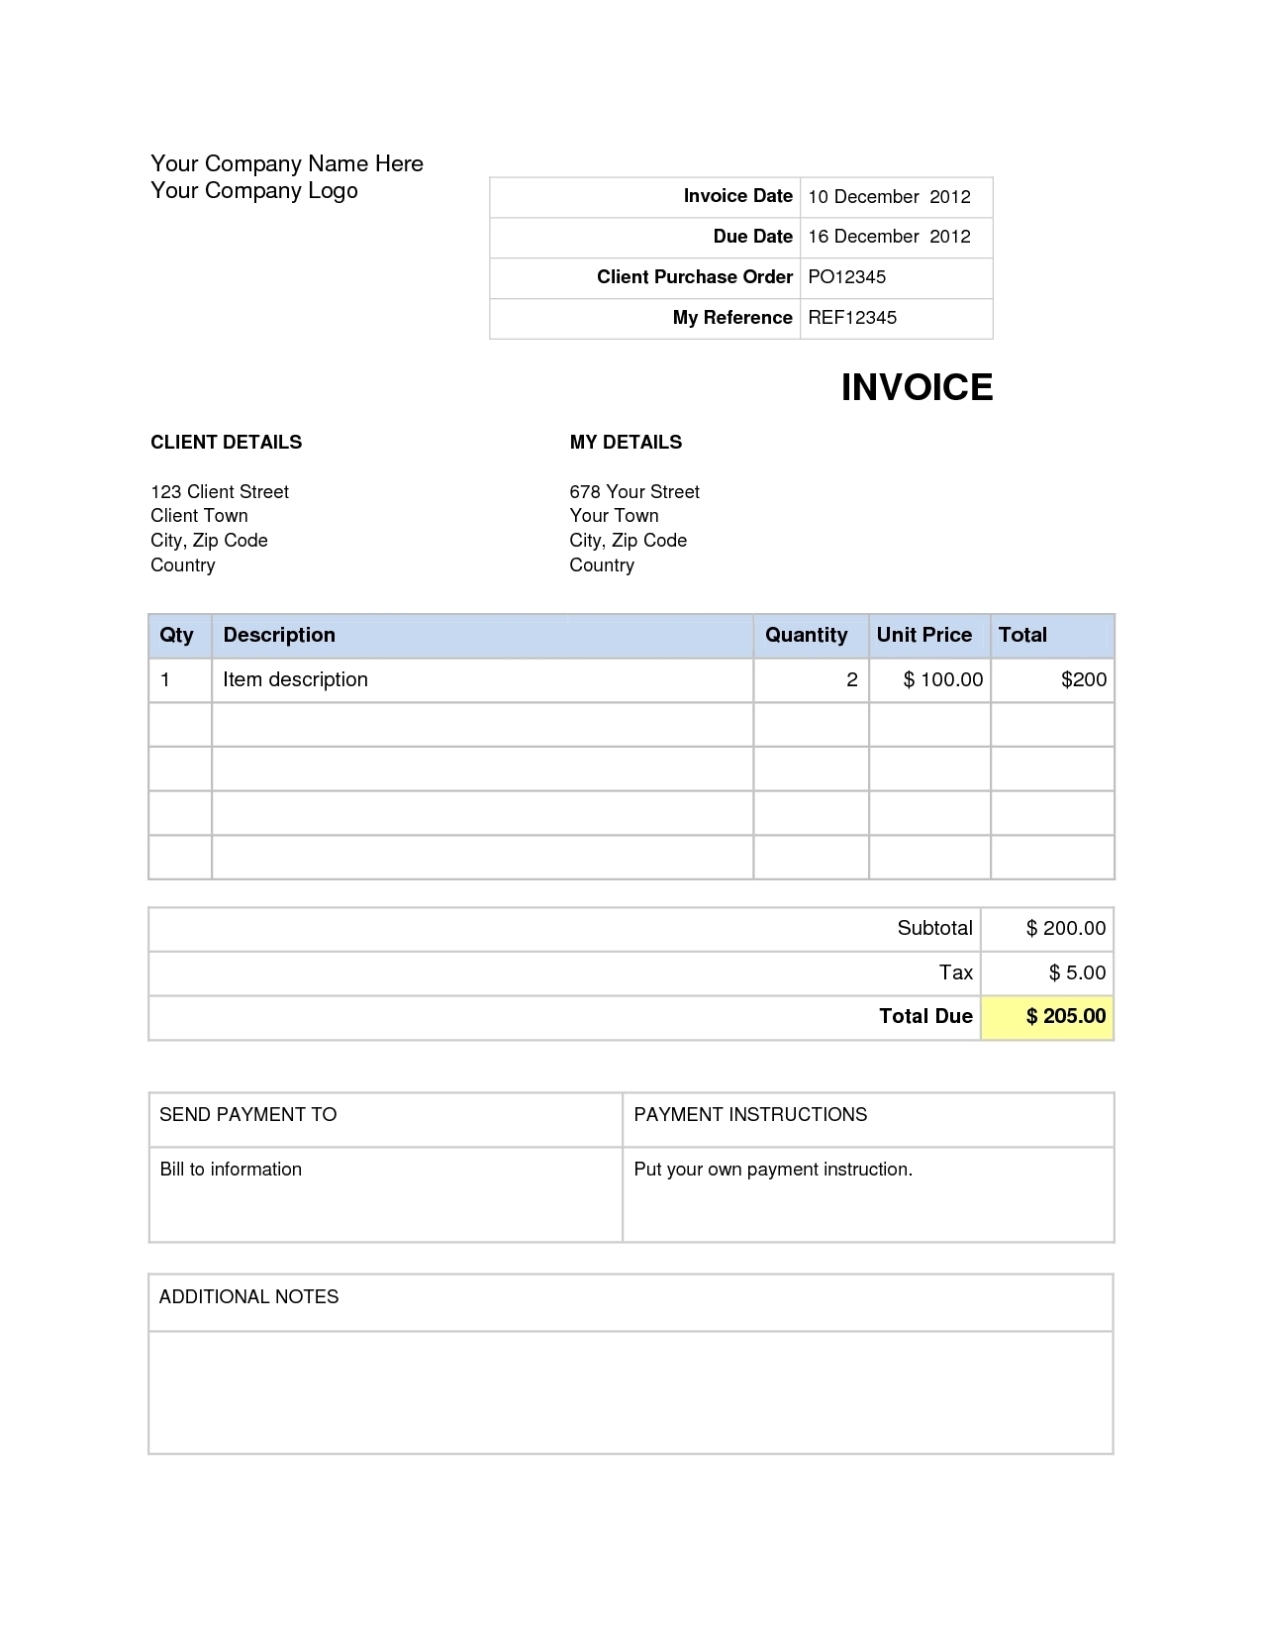 Invoice In Word * Invoice Template Ideas inside Invoice Template Word 2010